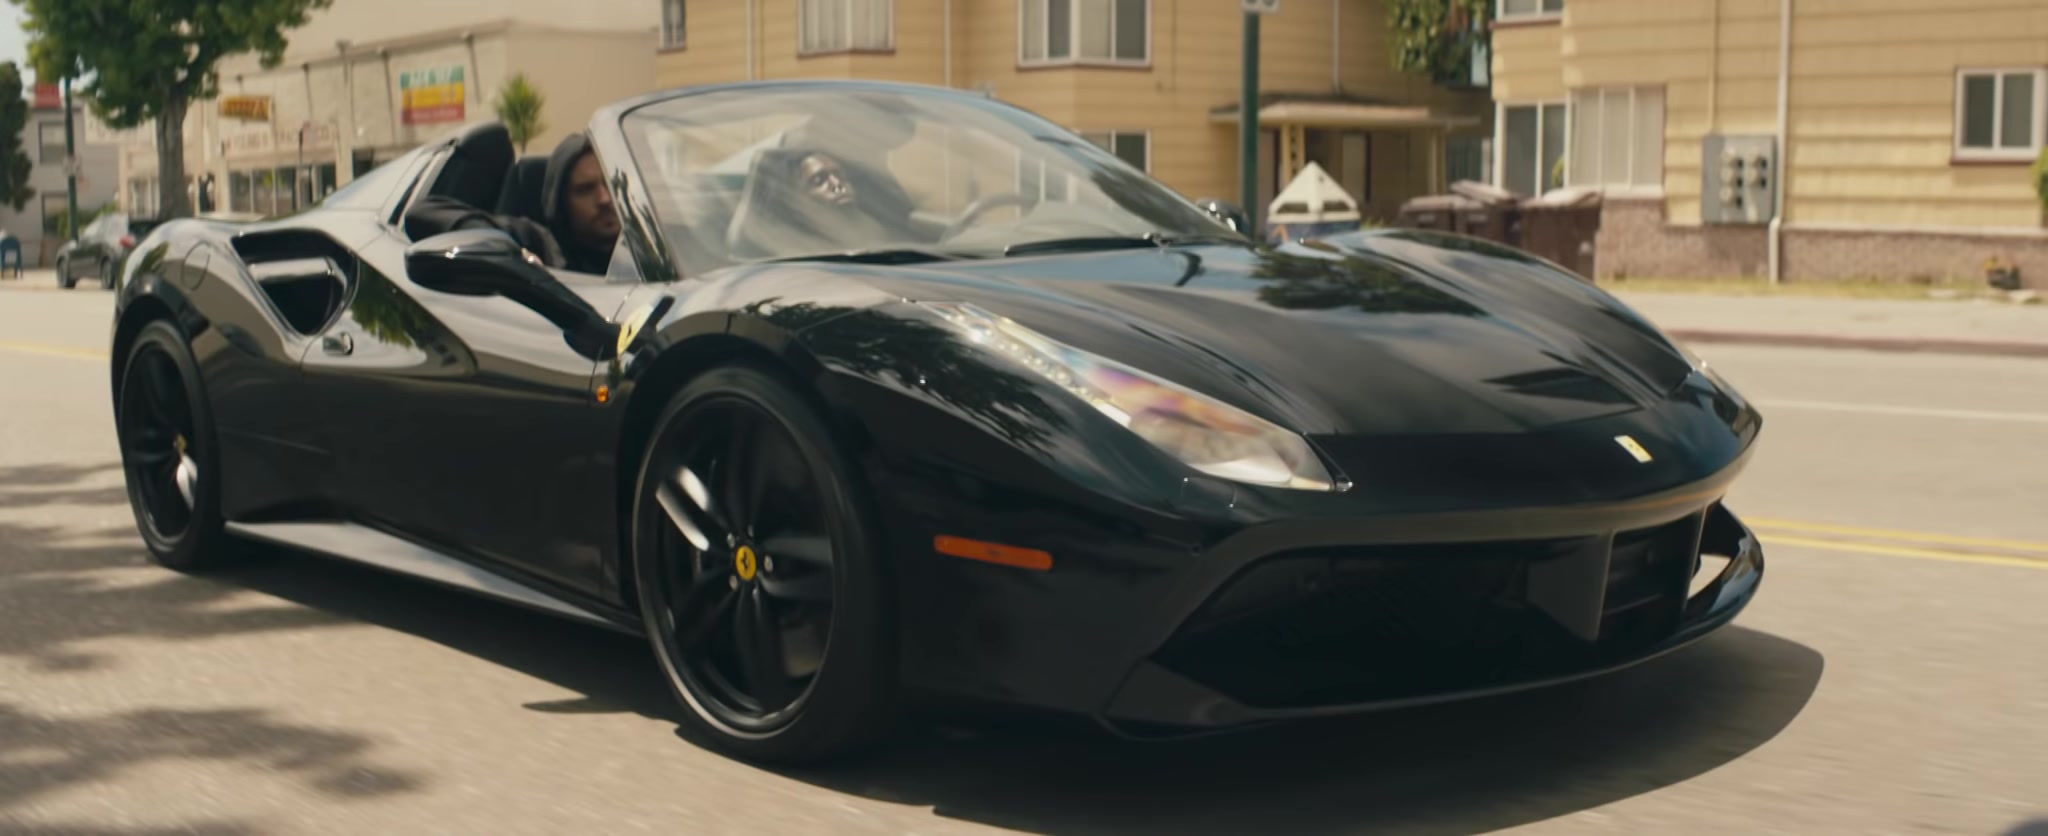 Ferrari Black Sports Car in Power by G-Eazy ft. Nef The Pharaoh, P-Lo (2018) Official ...